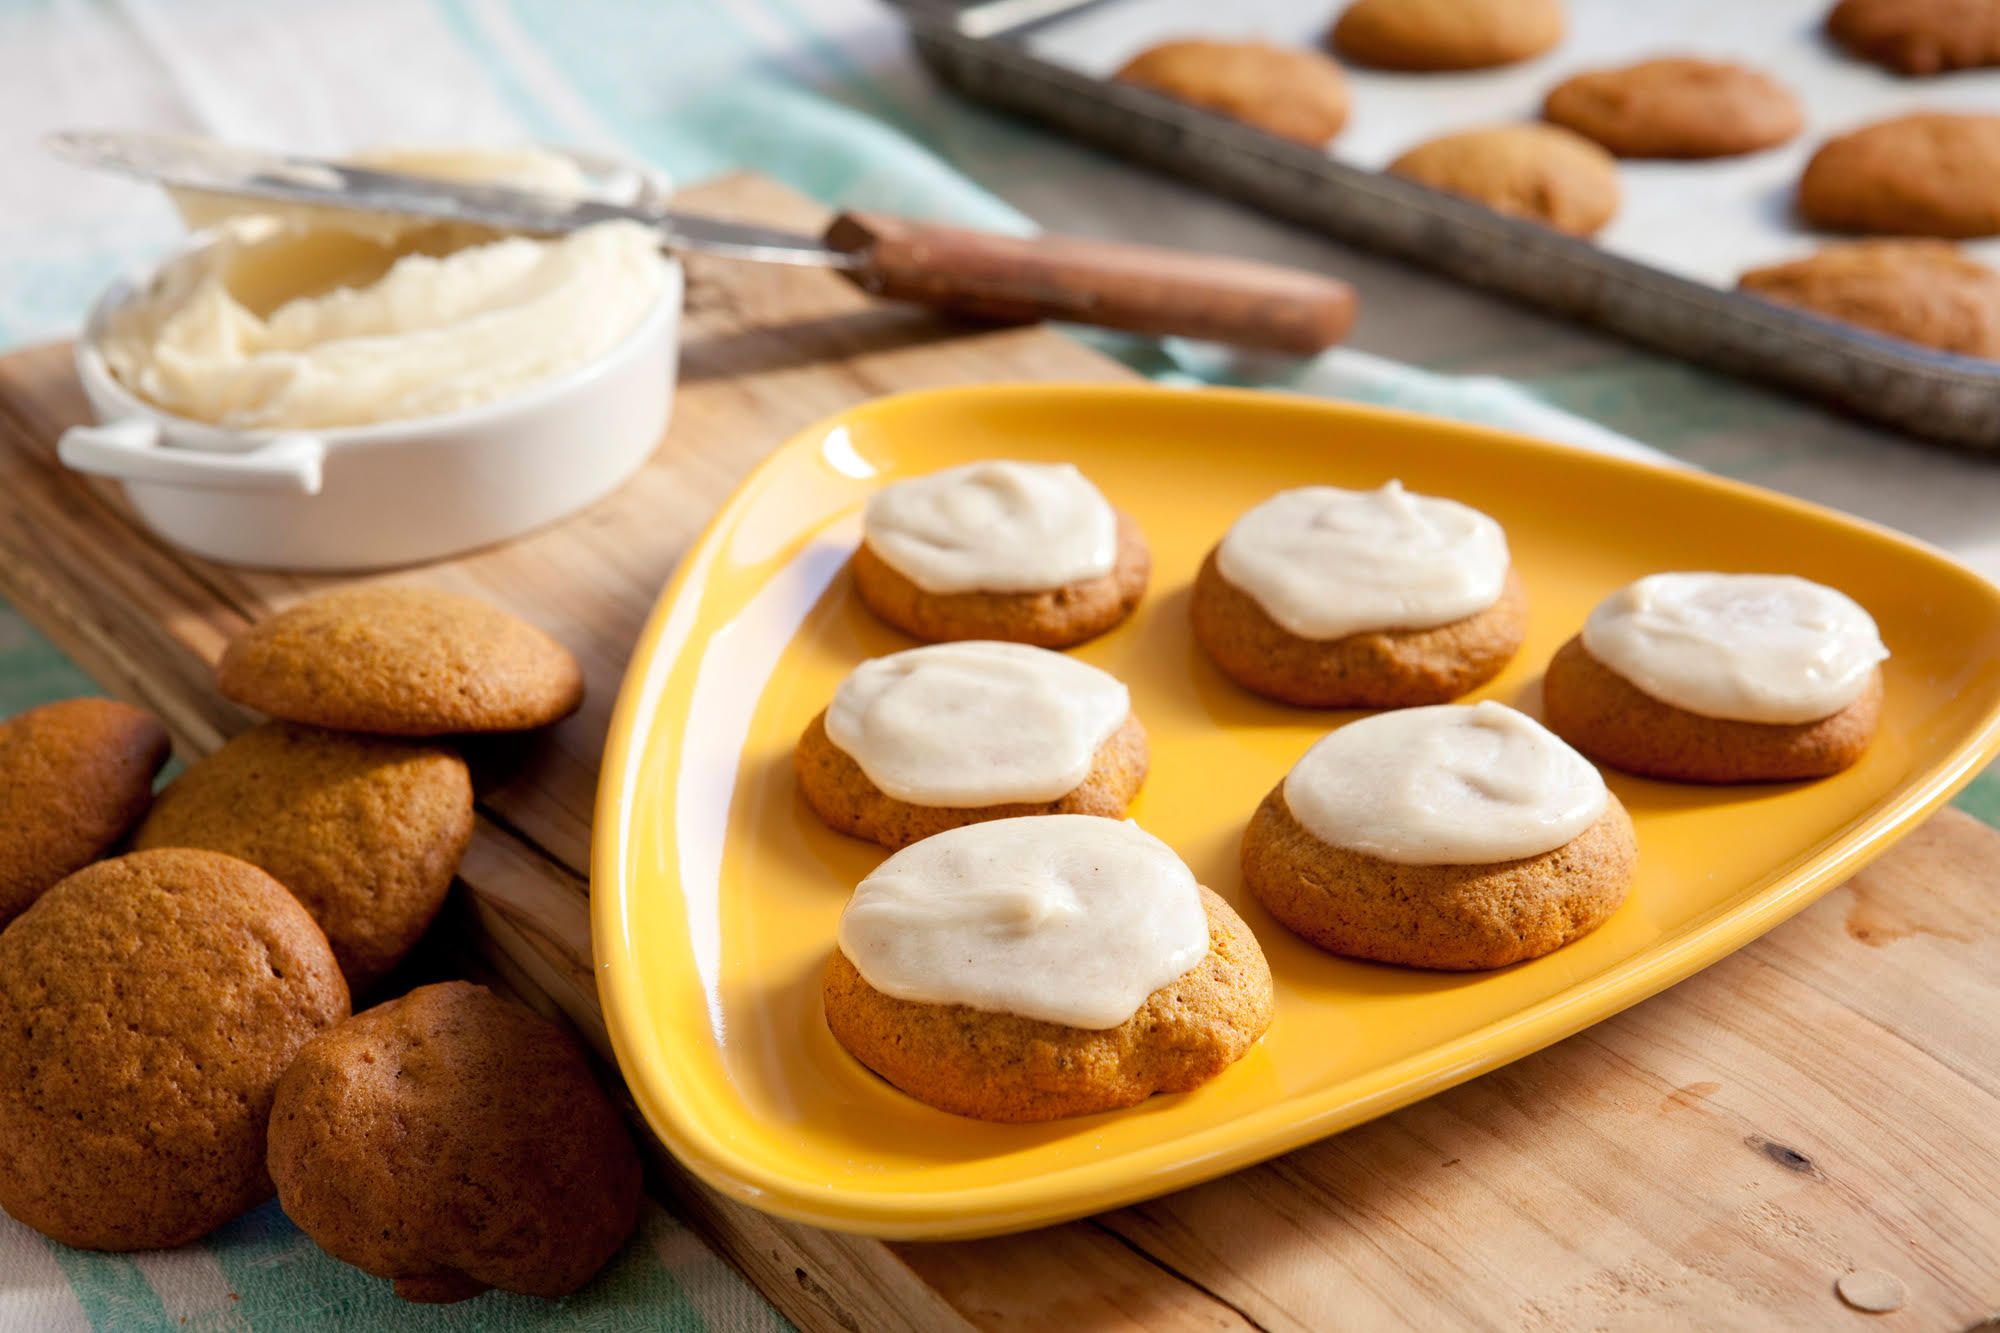 These Pumpkin Spice Cookies With Brown Butter Frosting Are The Only Snack You Need This Autumn